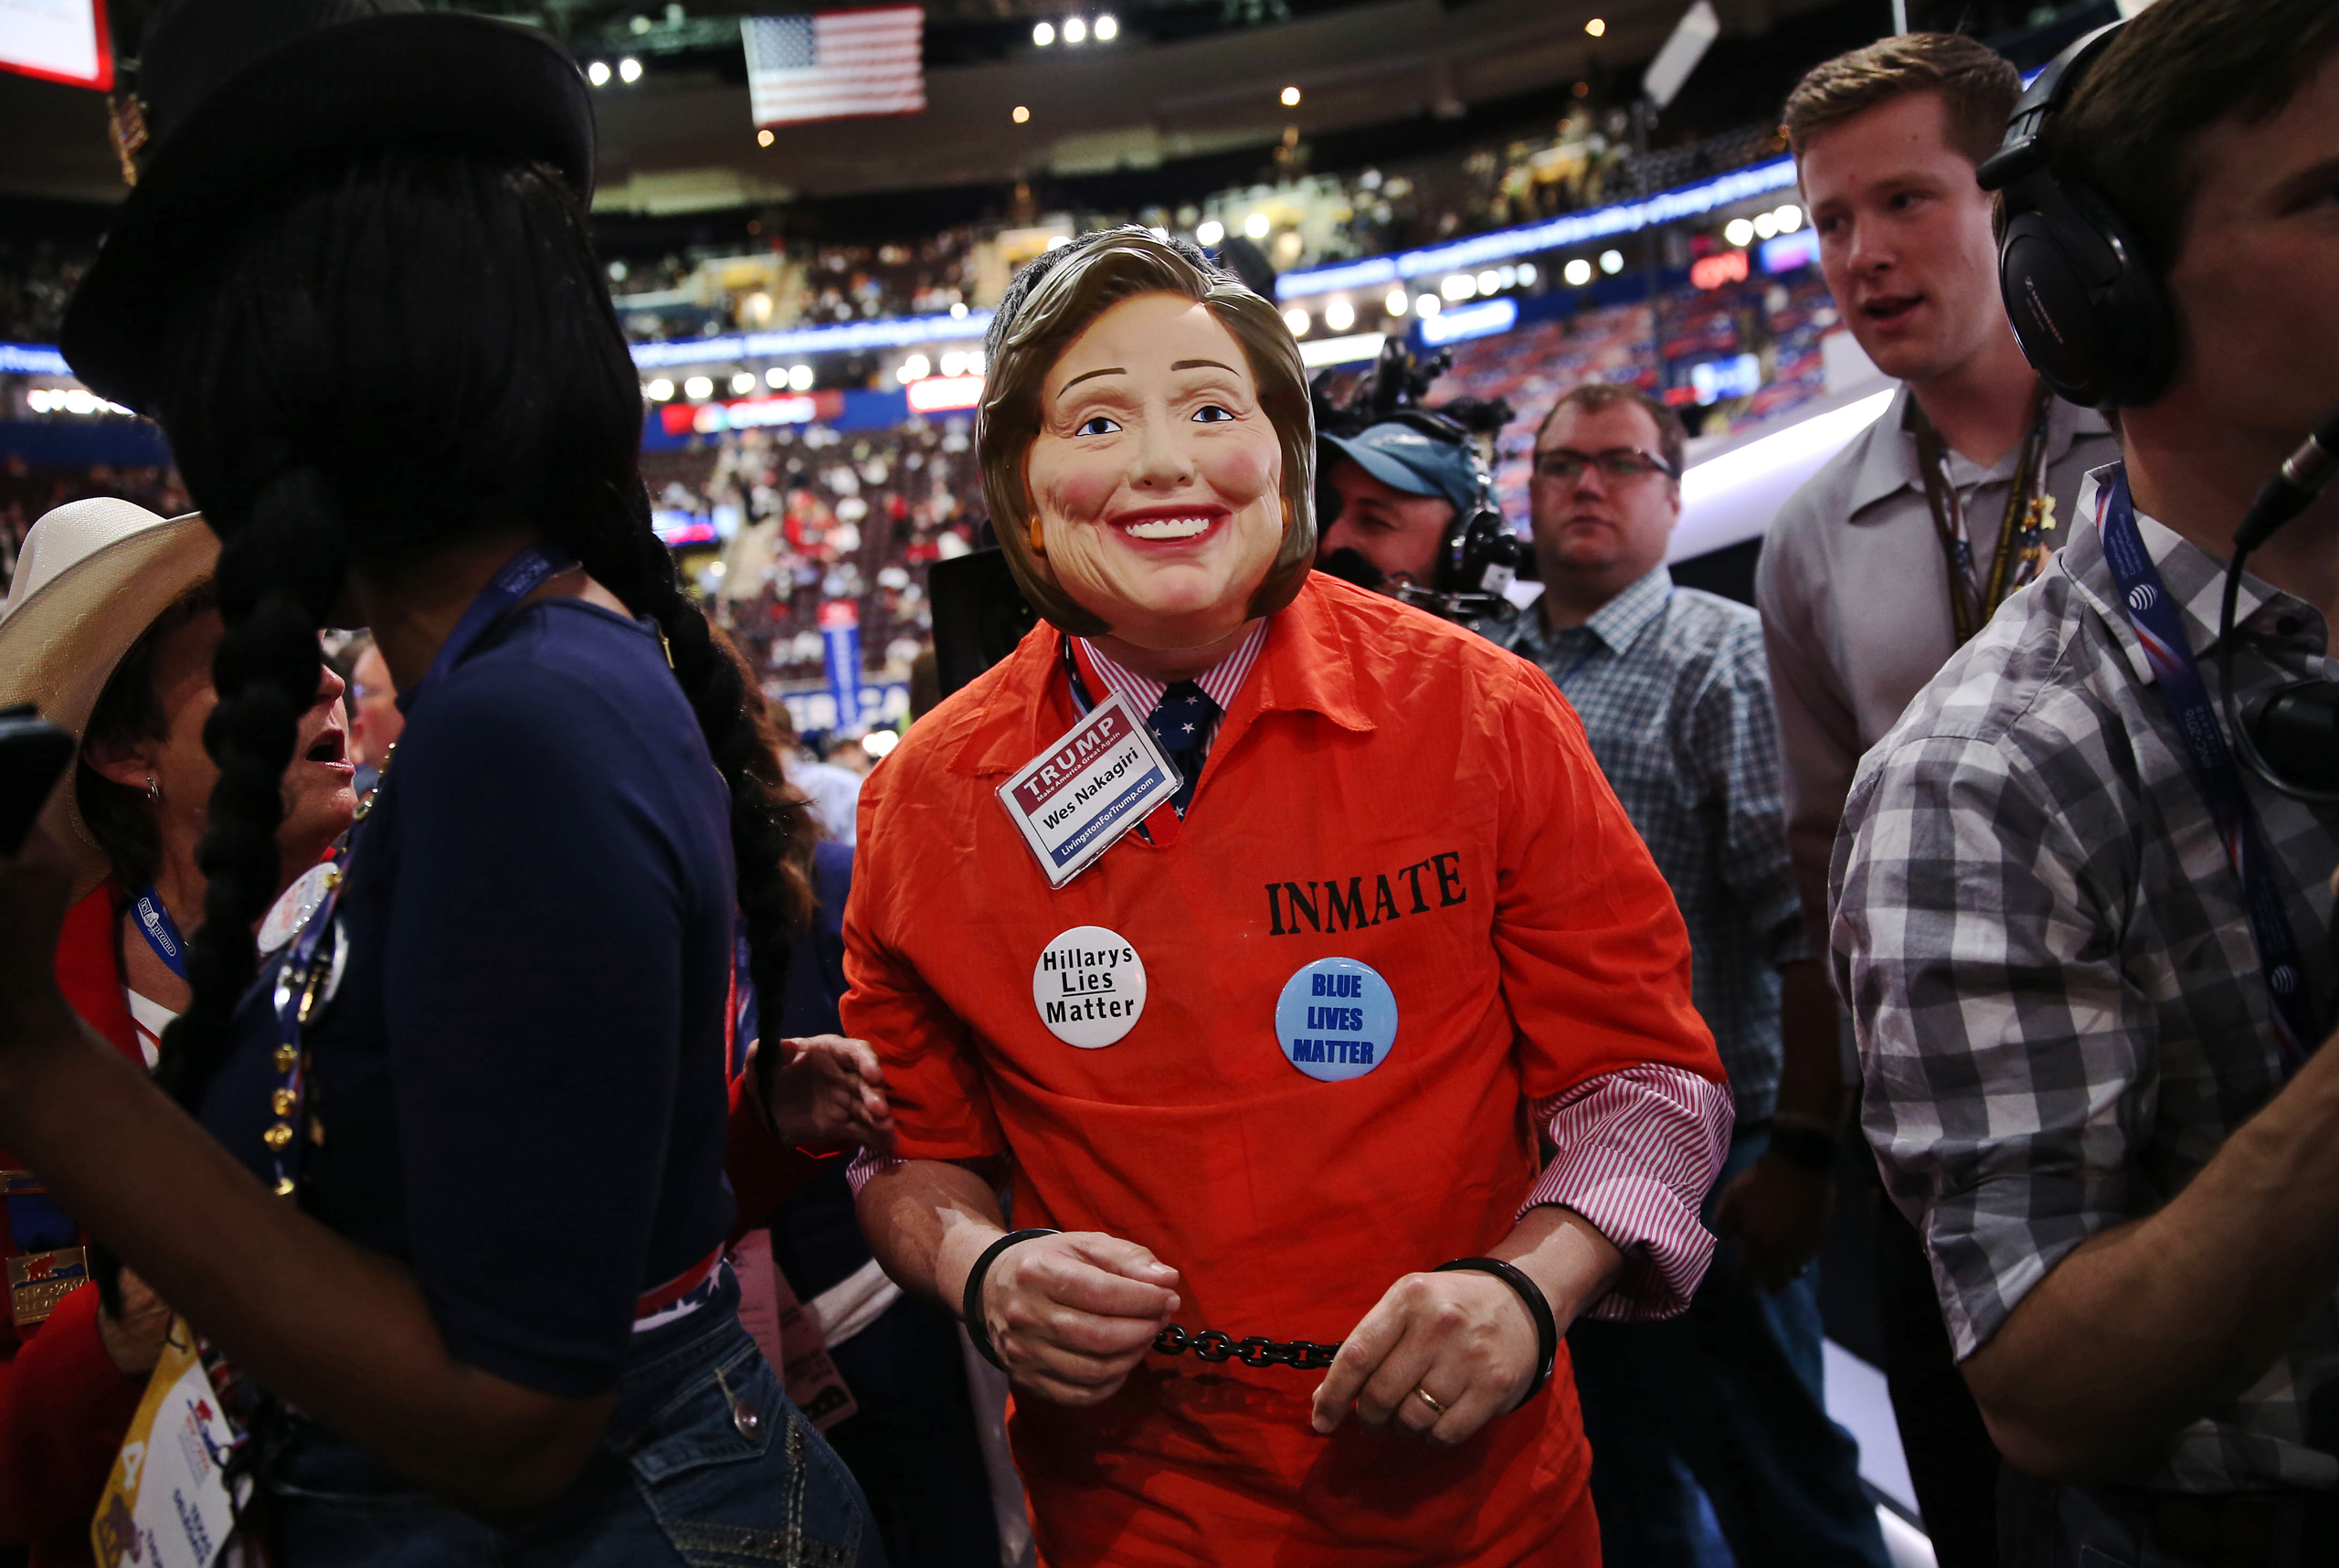 An attendee wears an inmate costume and mask in the likeness of Hillary Clinton during the Republican National Convention (RNC) in Cleveland  on July 21, 2016.